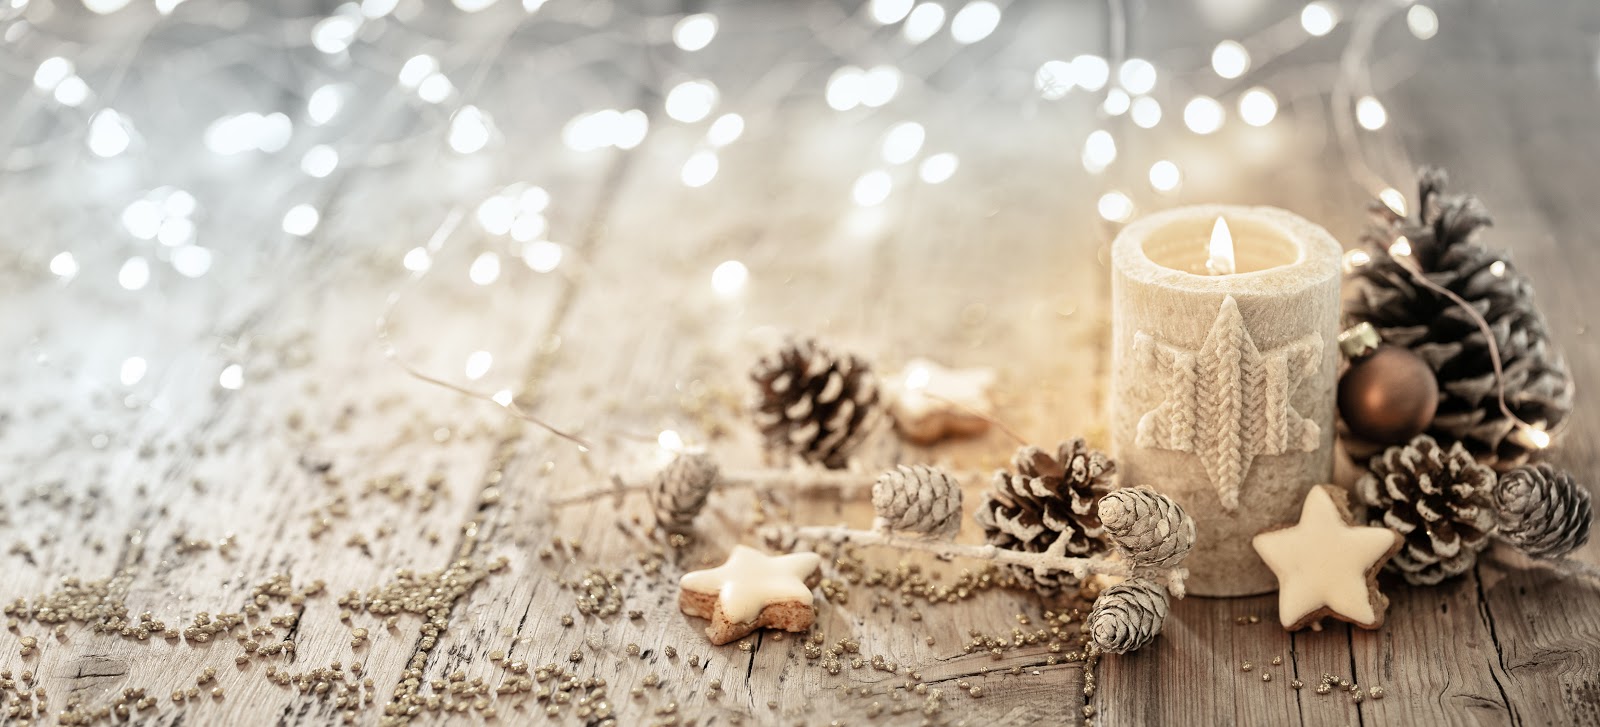 Christmas decorating ideas: A display made with a candle, pine cones, and ornaments